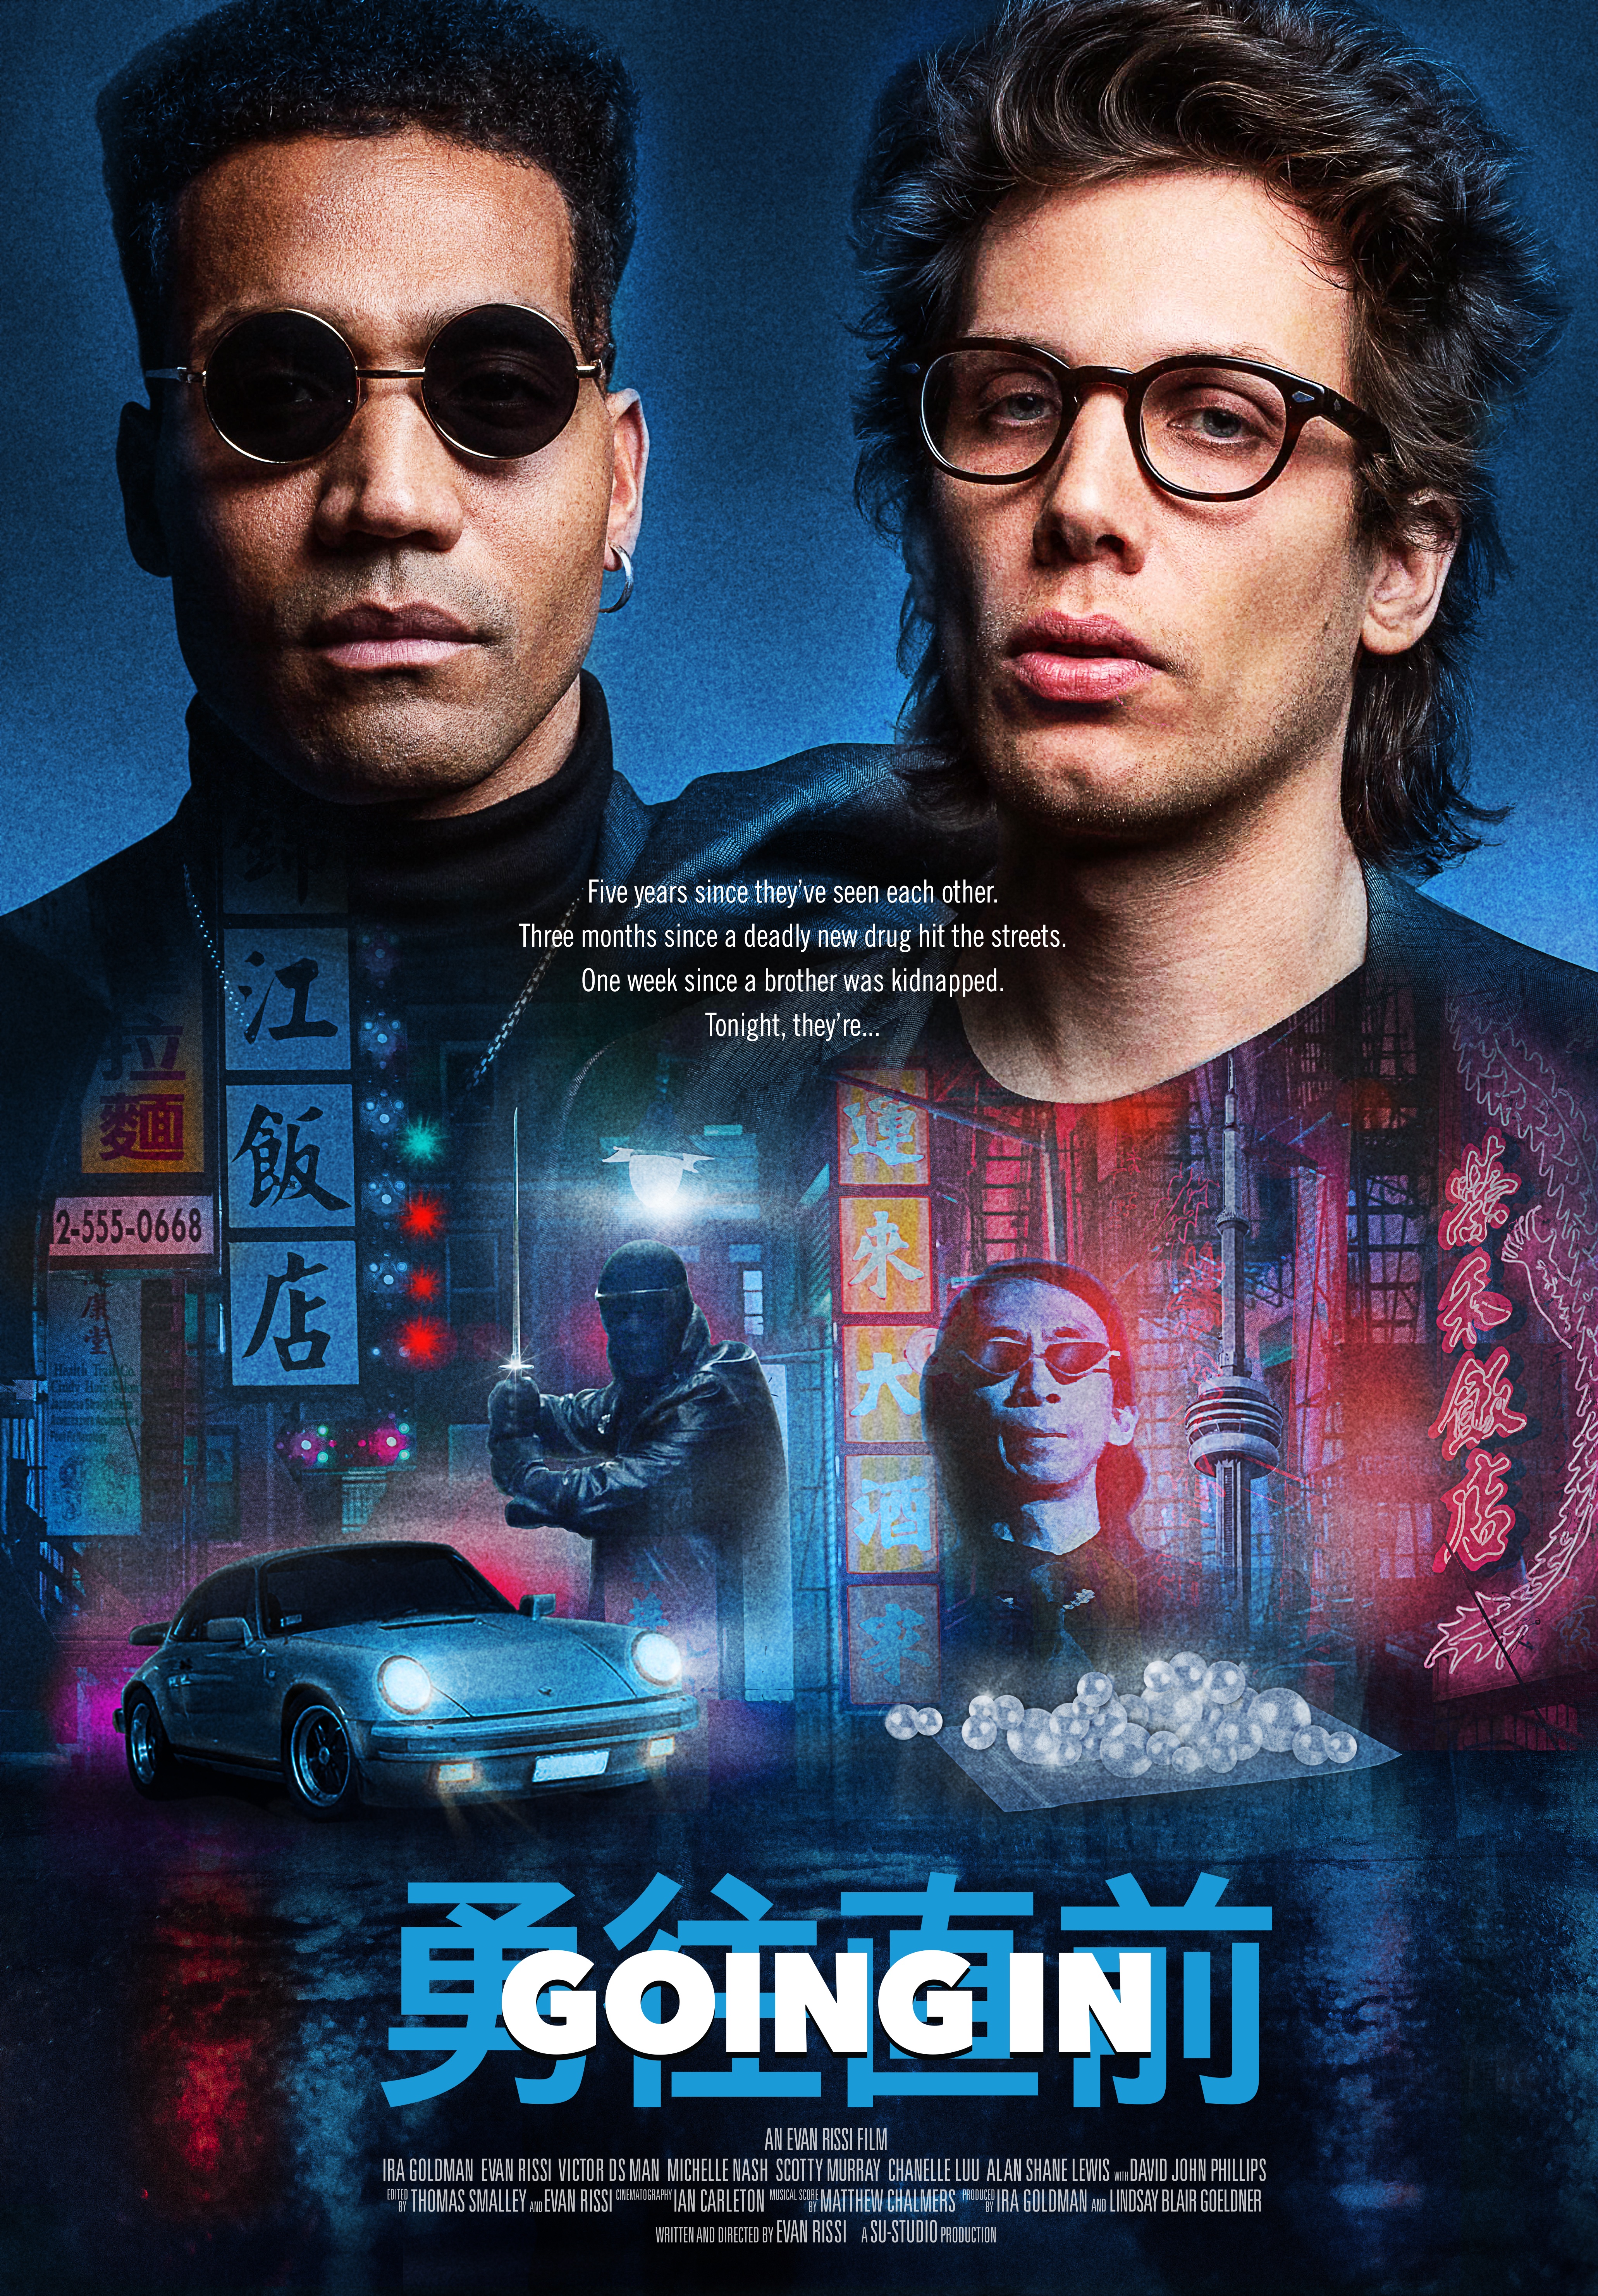 Going In Movie Poster with director, writer, and lead role Evan Rissi and Ira Goldman super imposed over Chinatown, Toronto with lead protaganist Feng and his illicit drug pearl